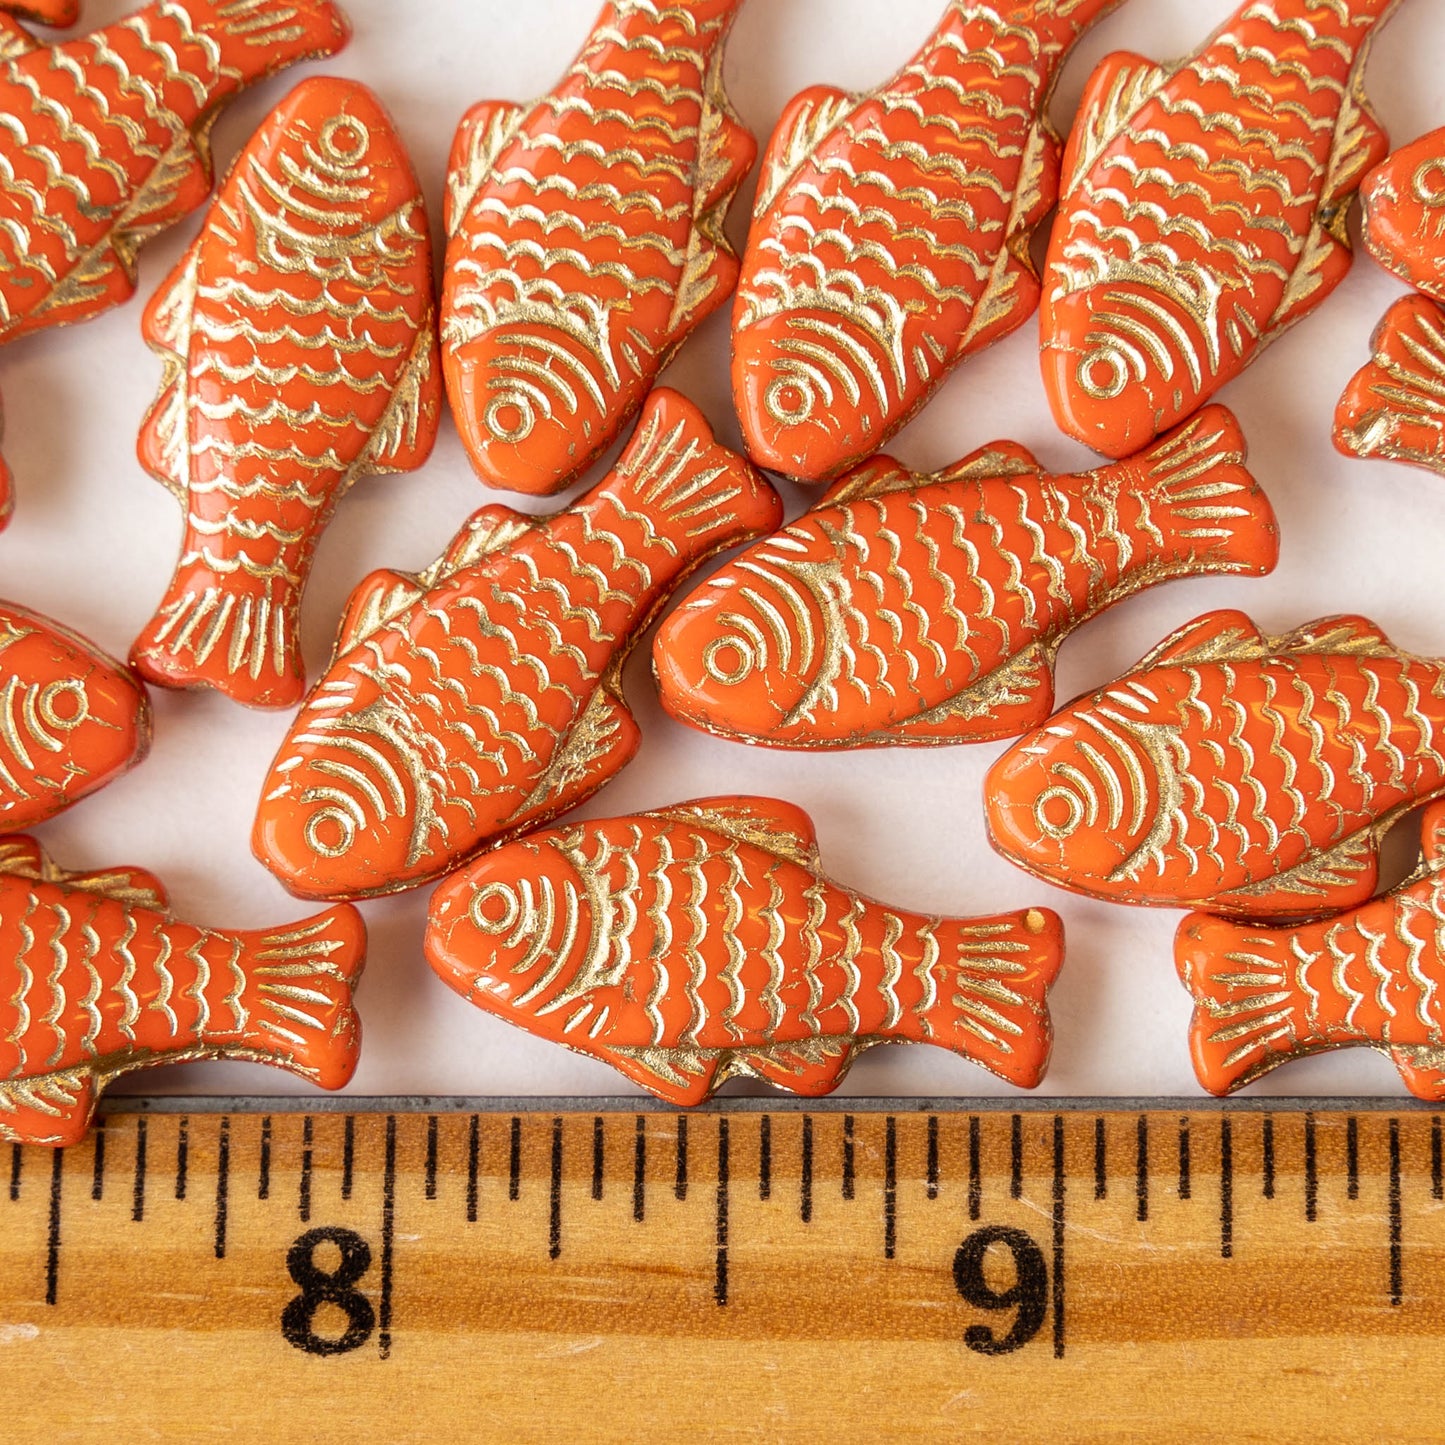 Glass Fish Beads - Opaque Orange with Gold - 6 or 12